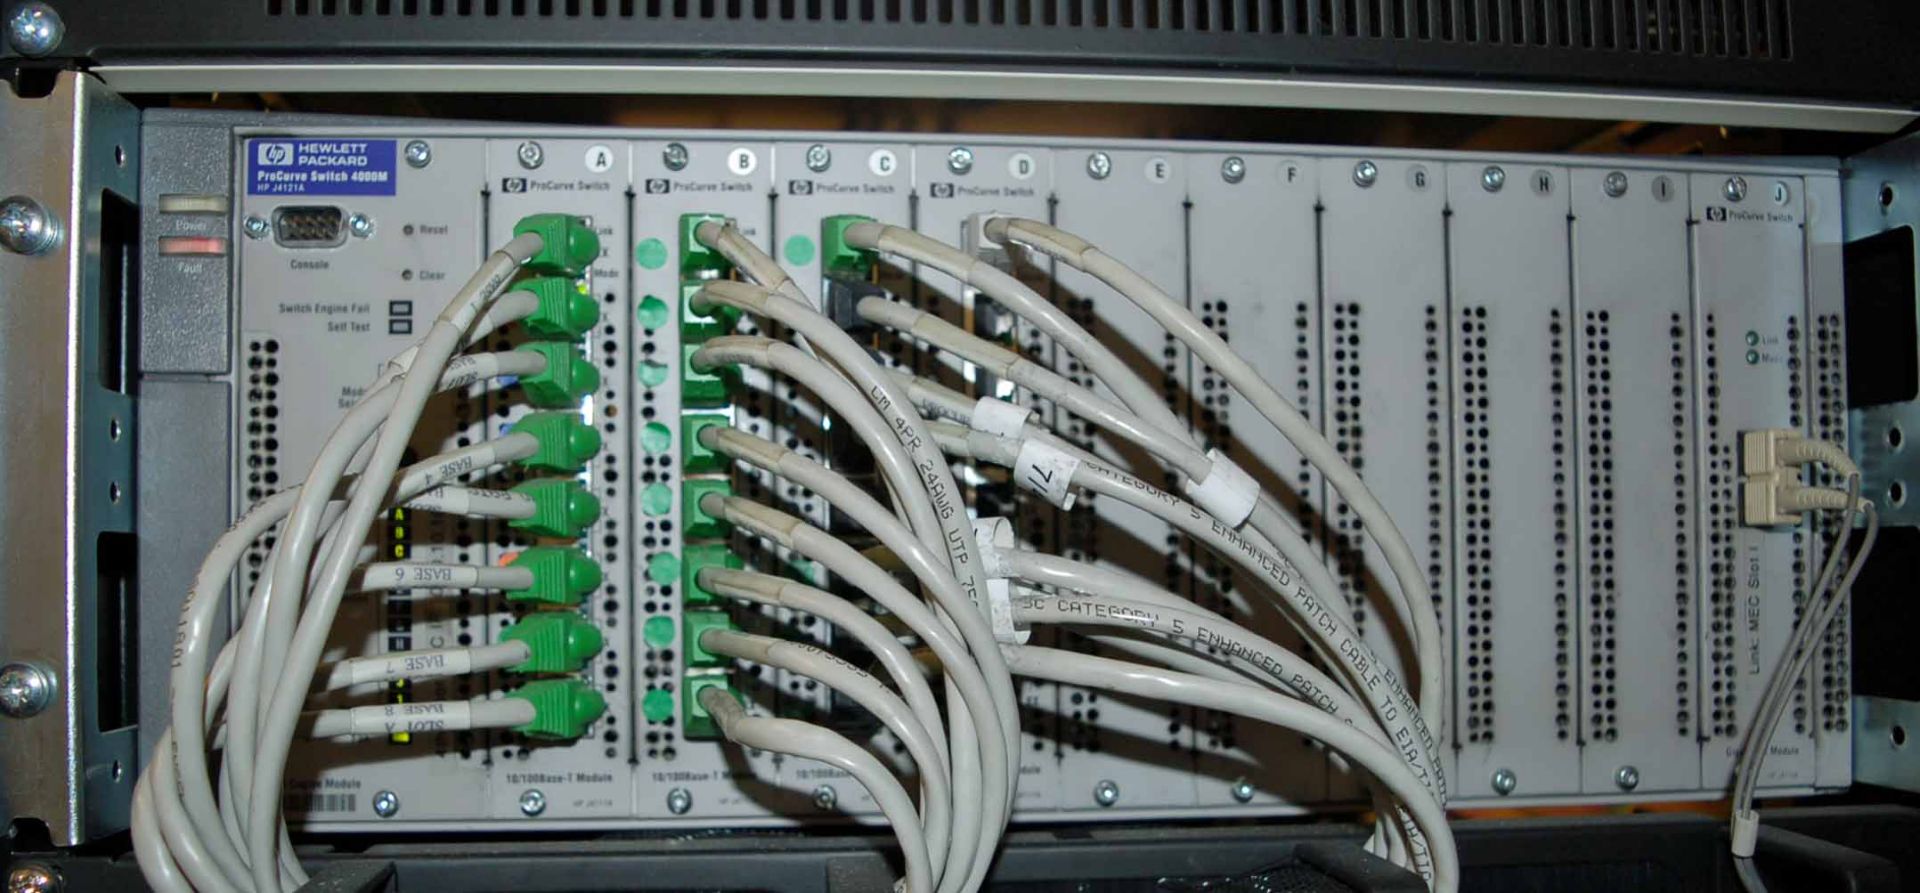 A HEWLETT PACKARD ProCurve Switch 4000M Modular Network Switch fitted One Switch Engine Module, Four